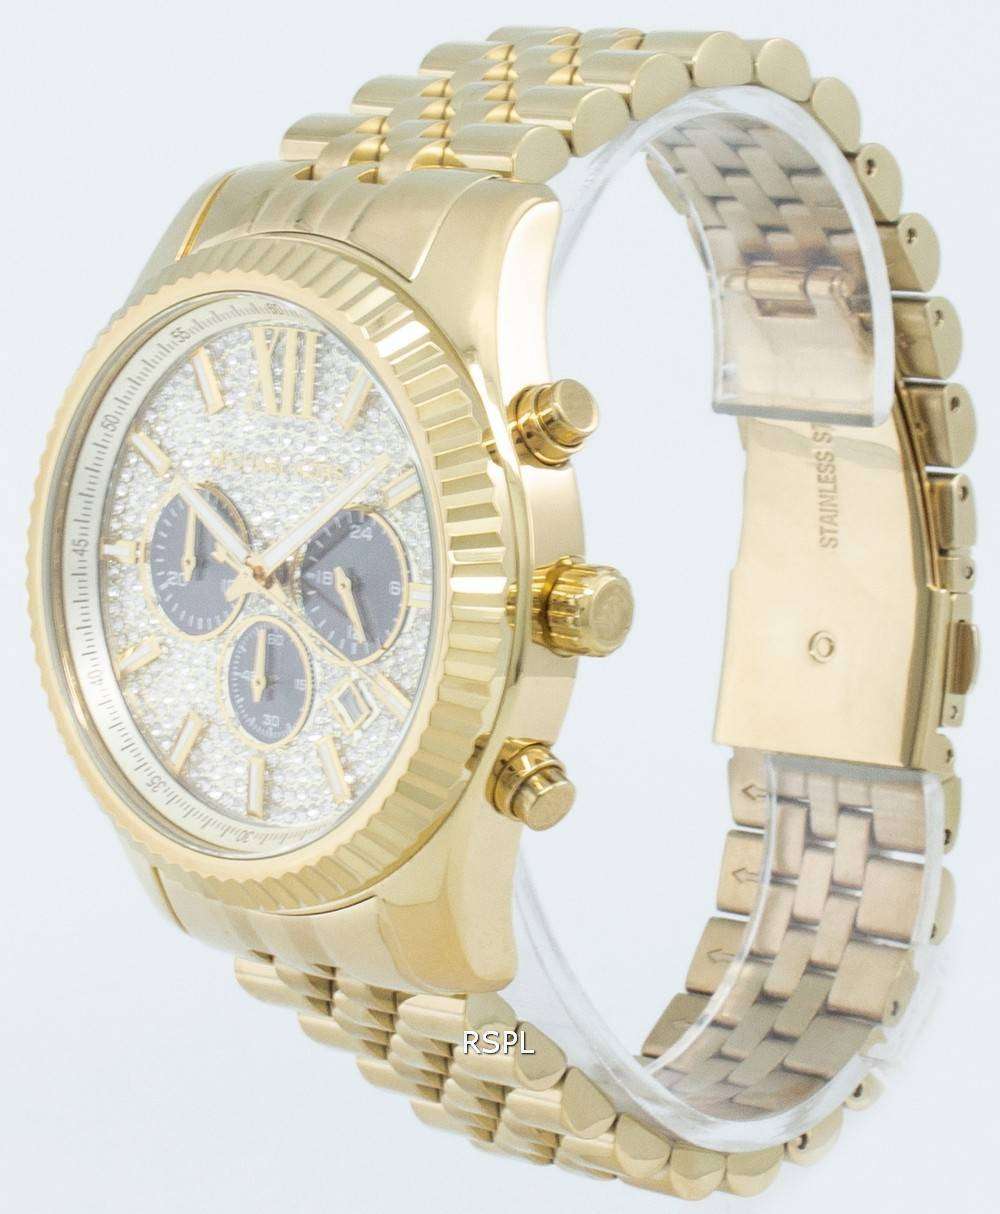 michael kors mens watch with crystals